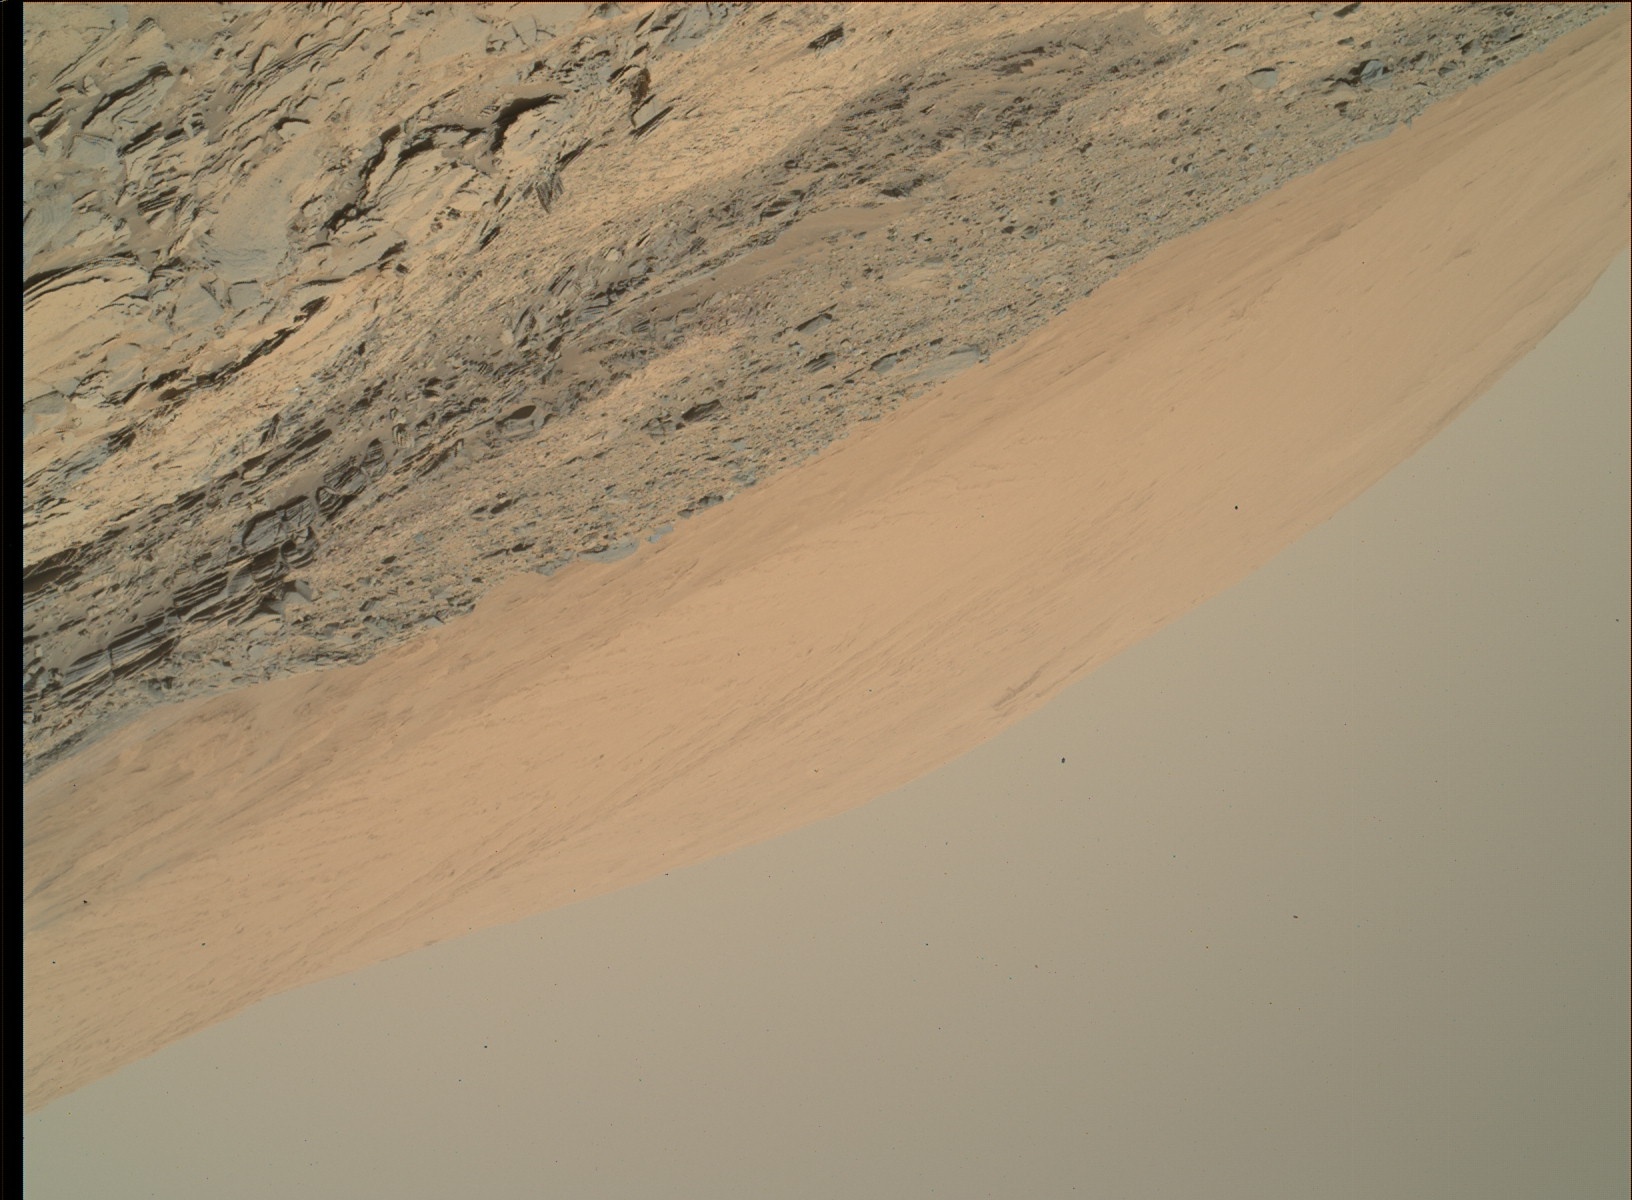 Nasa's Mars rover Curiosity acquired this image using its Mars Hand Lens Imager (MAHLI) on Sol 1107